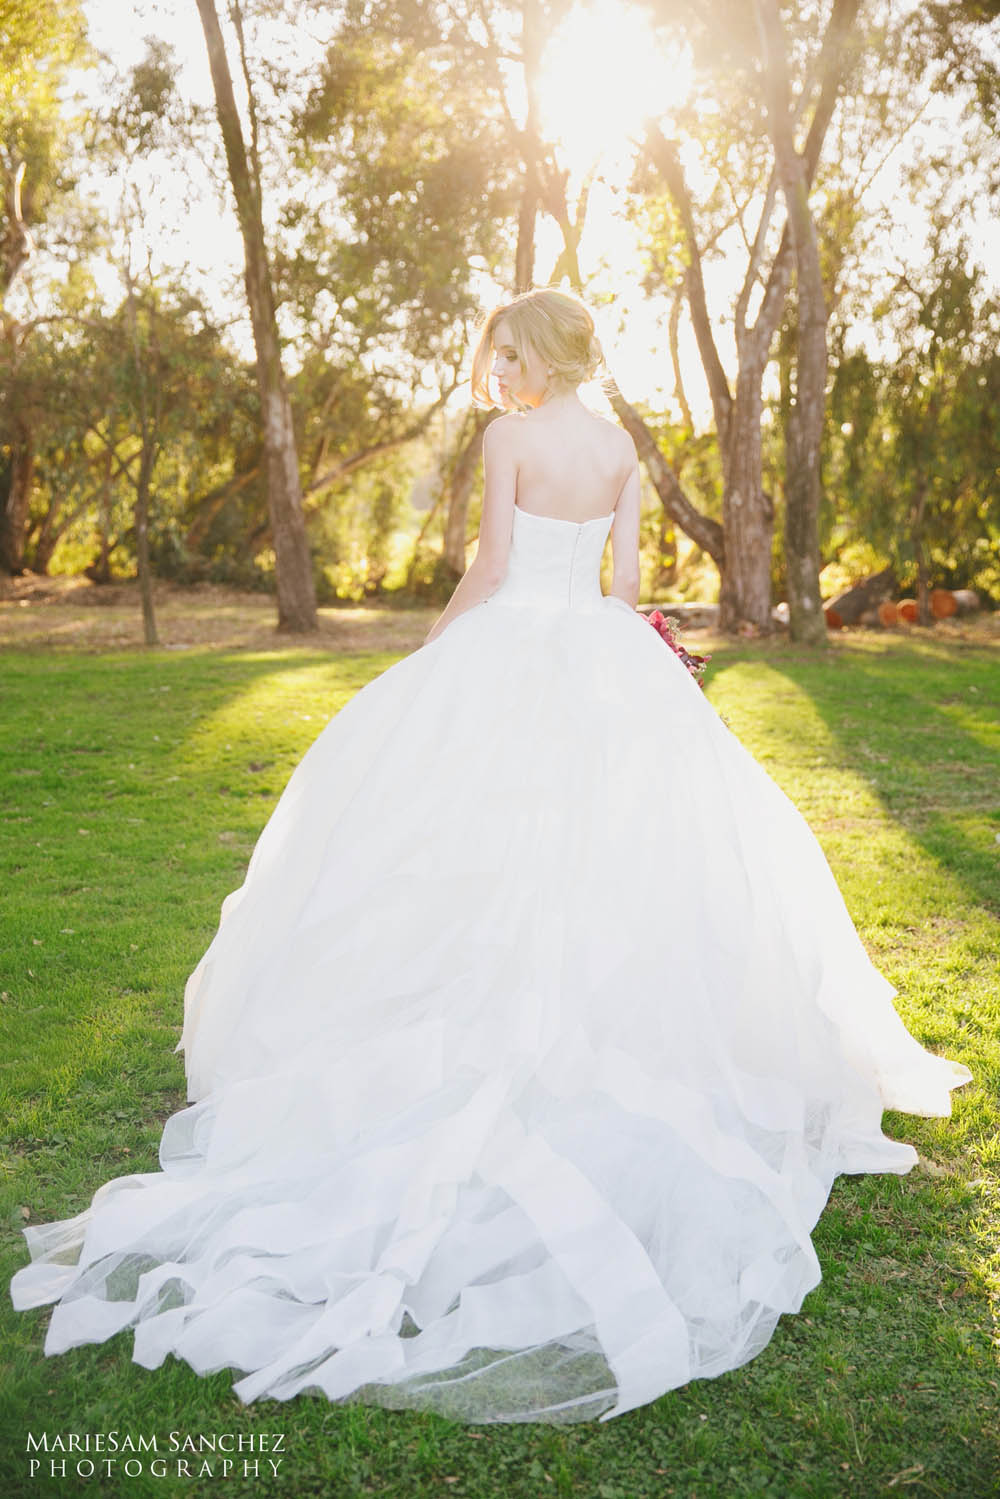 More information about "Something Borrowed: Would You Rent Your Wedding Dress?"